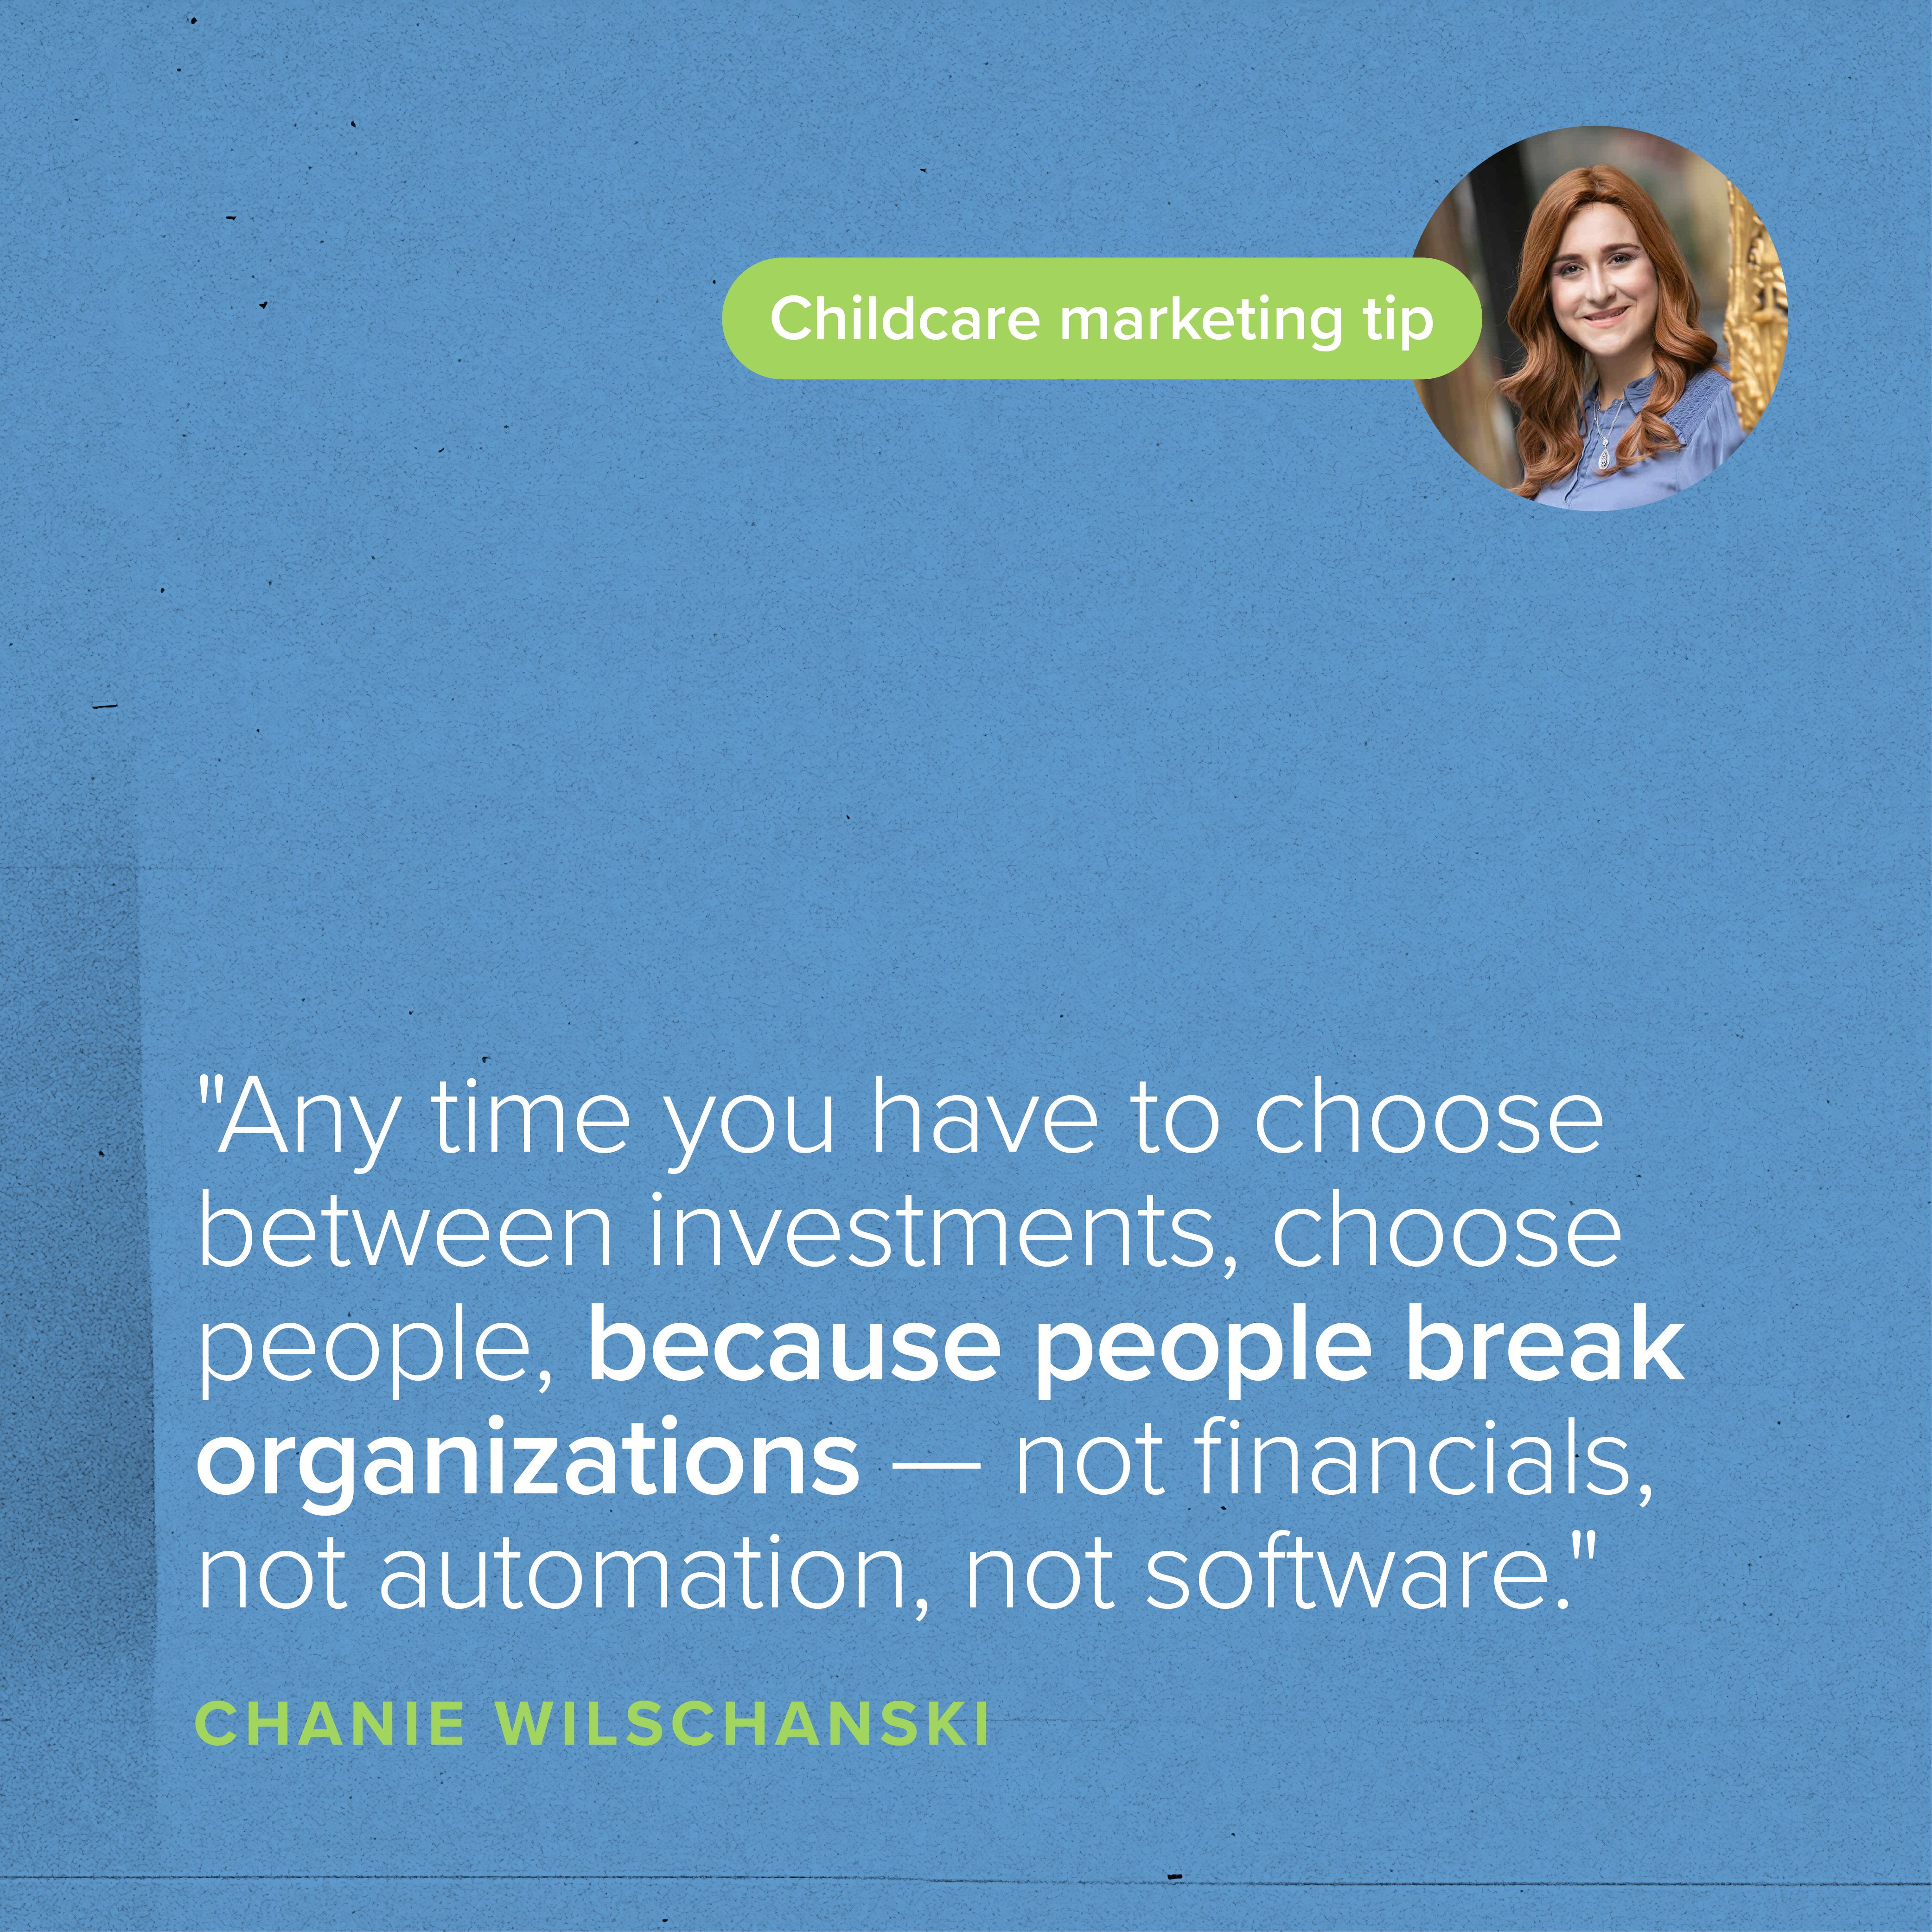 Quote Card: Want to Enroll More Families? Chanie Wilschanski Shares Tips